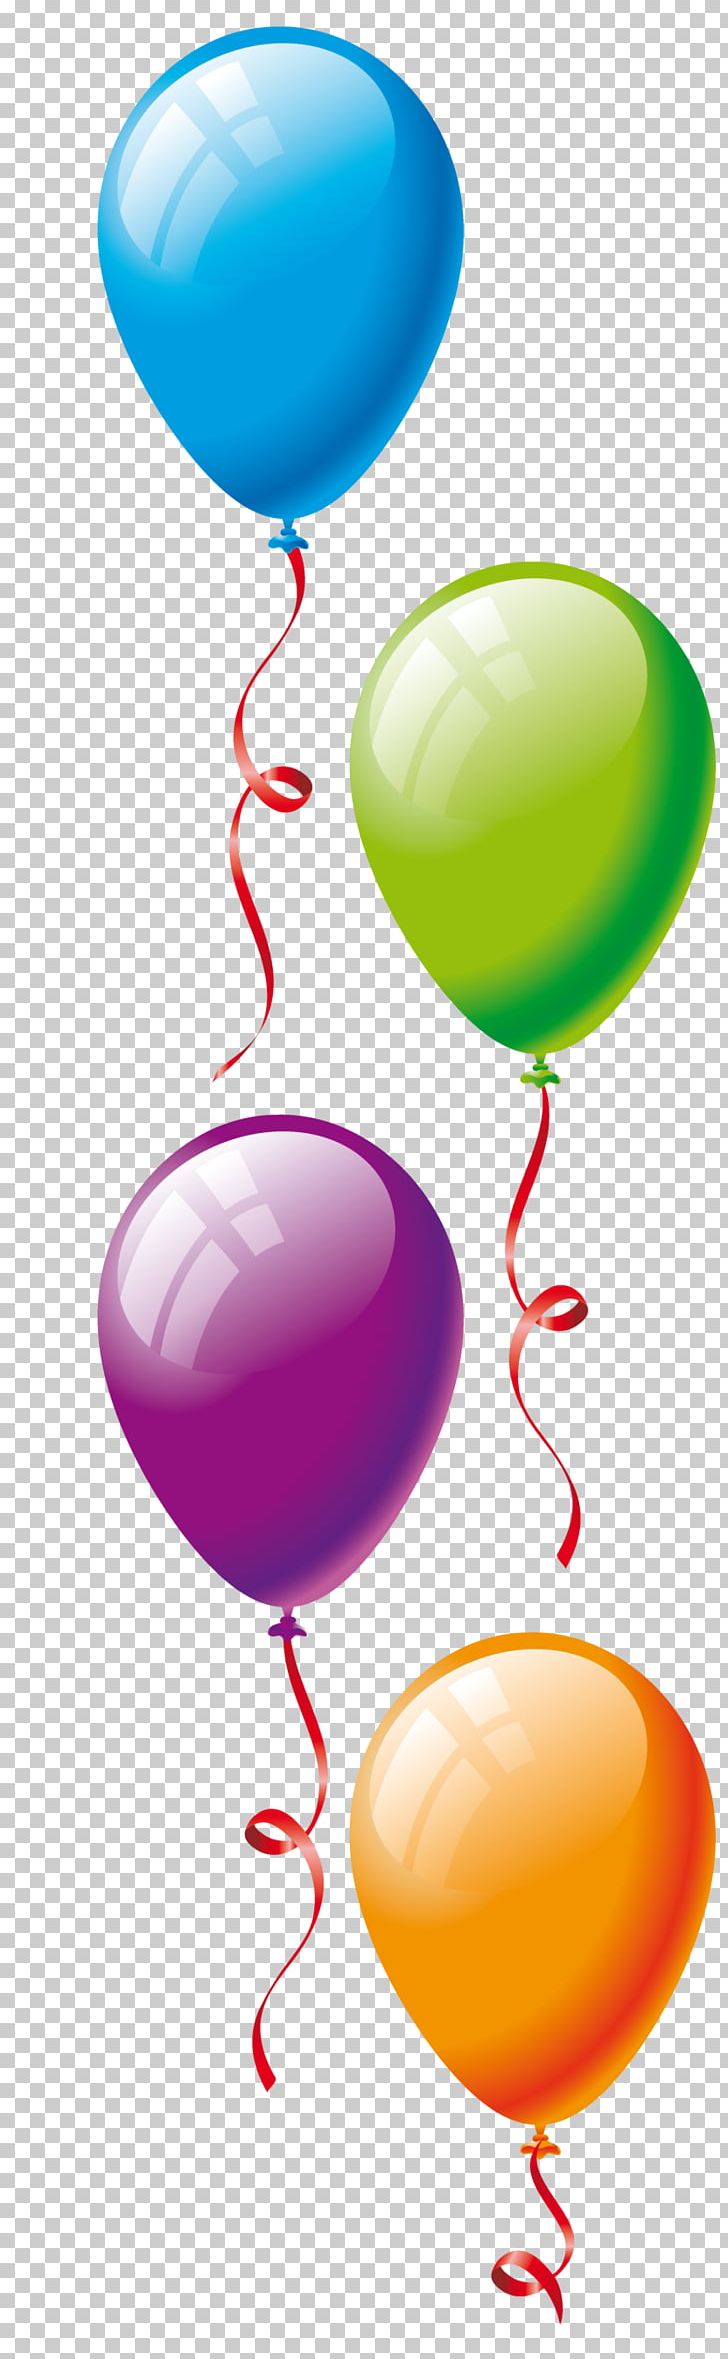 Toy Balloon Birthday Party PNG, Clipart, Balloon, Birthday, Bopet, Happy Birthday To You, Holiday Free PNG Download